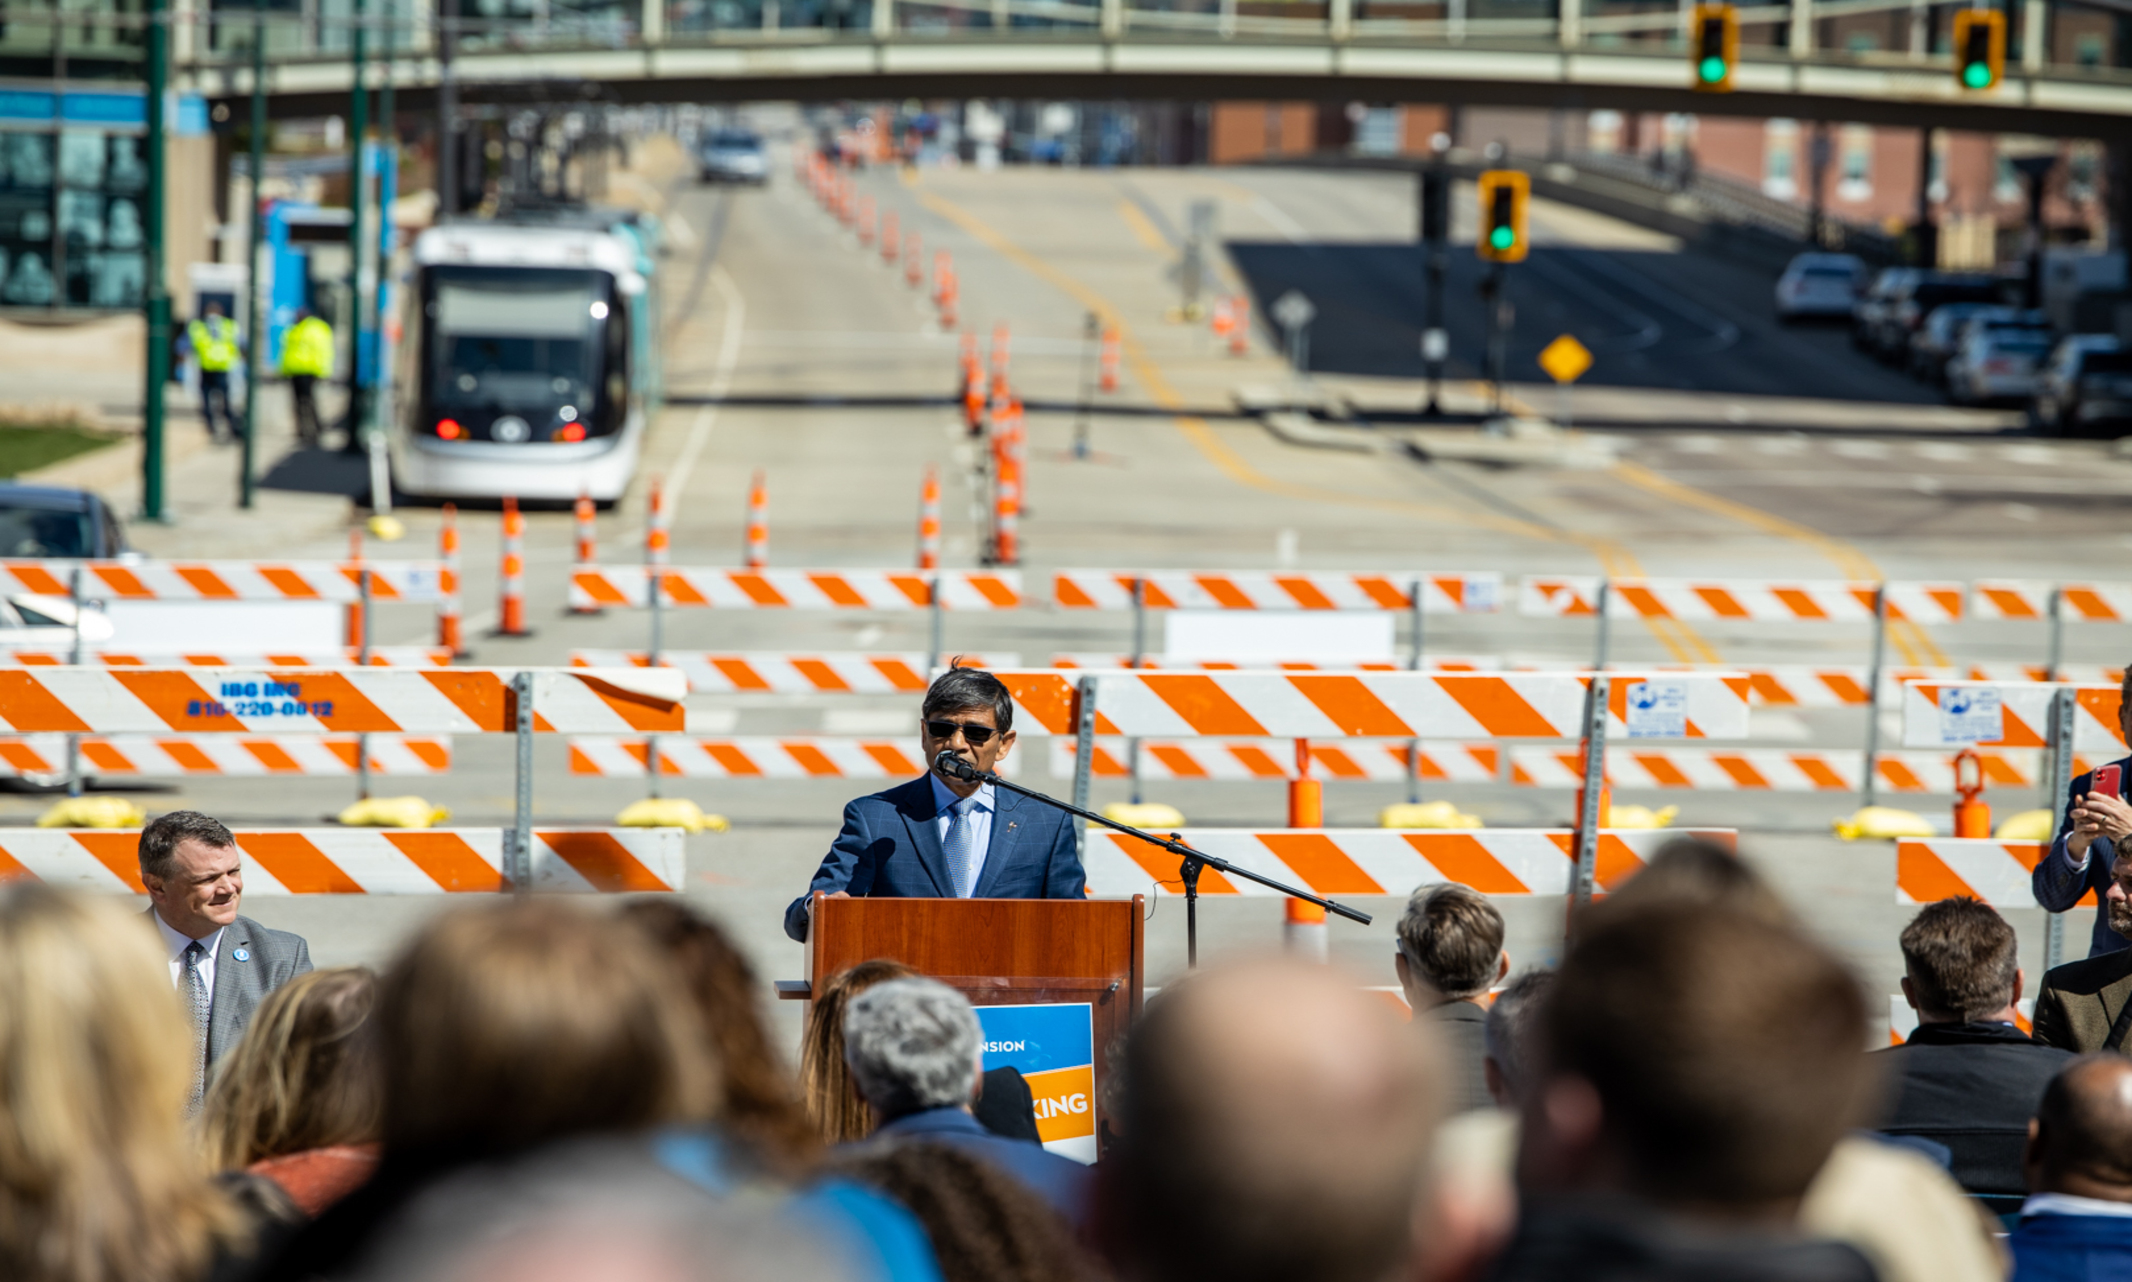 UMKC Chancellor Mauli Agrawal speaks at the event in front of traffic signs 